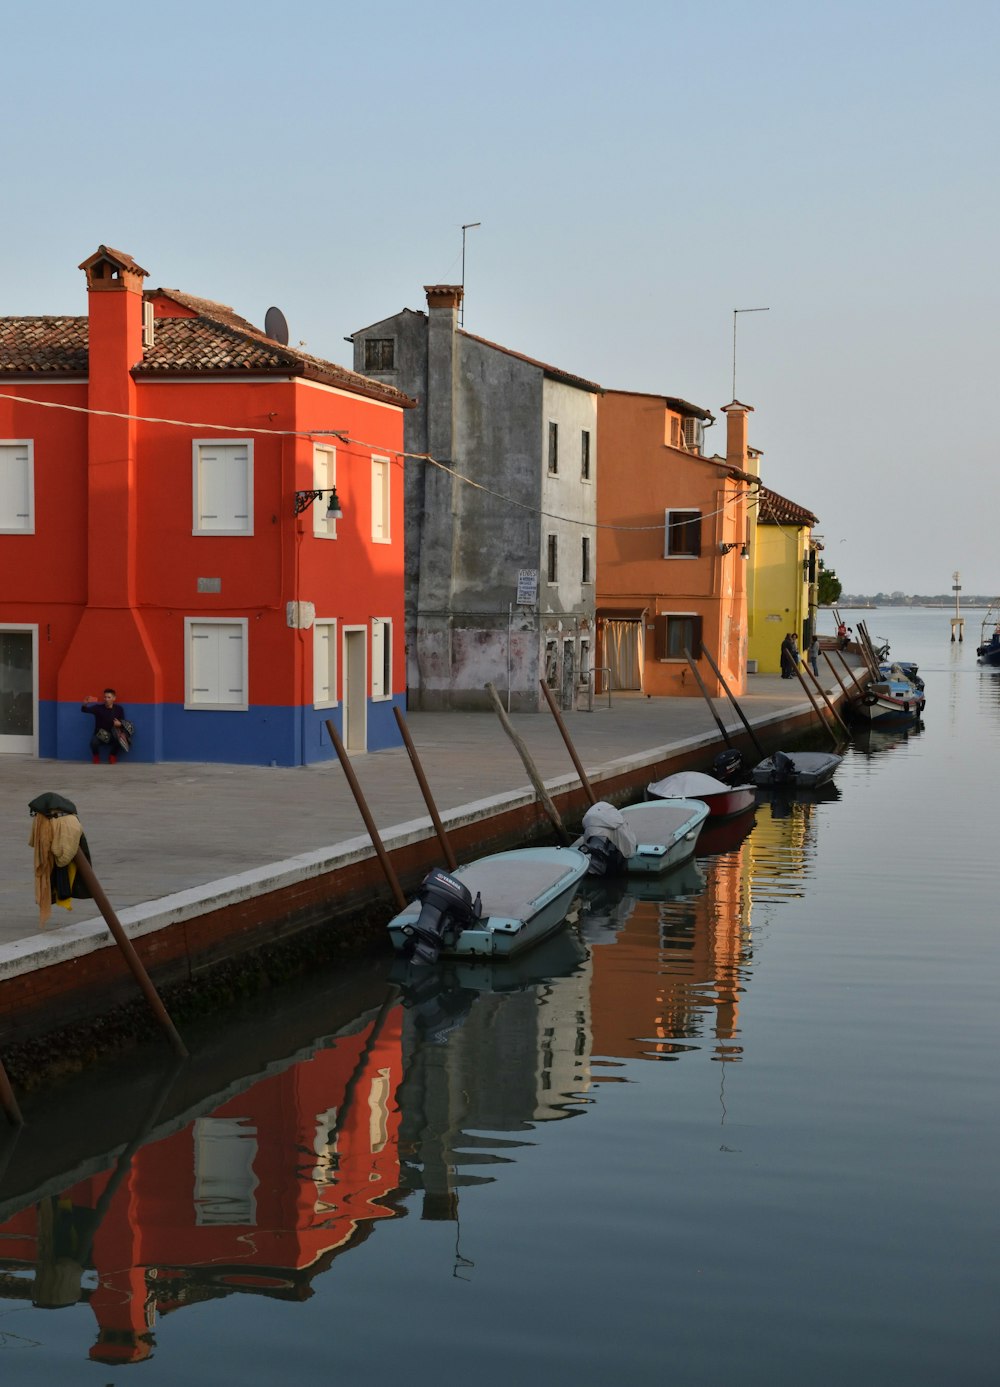 a row of boats sitting next to a red building